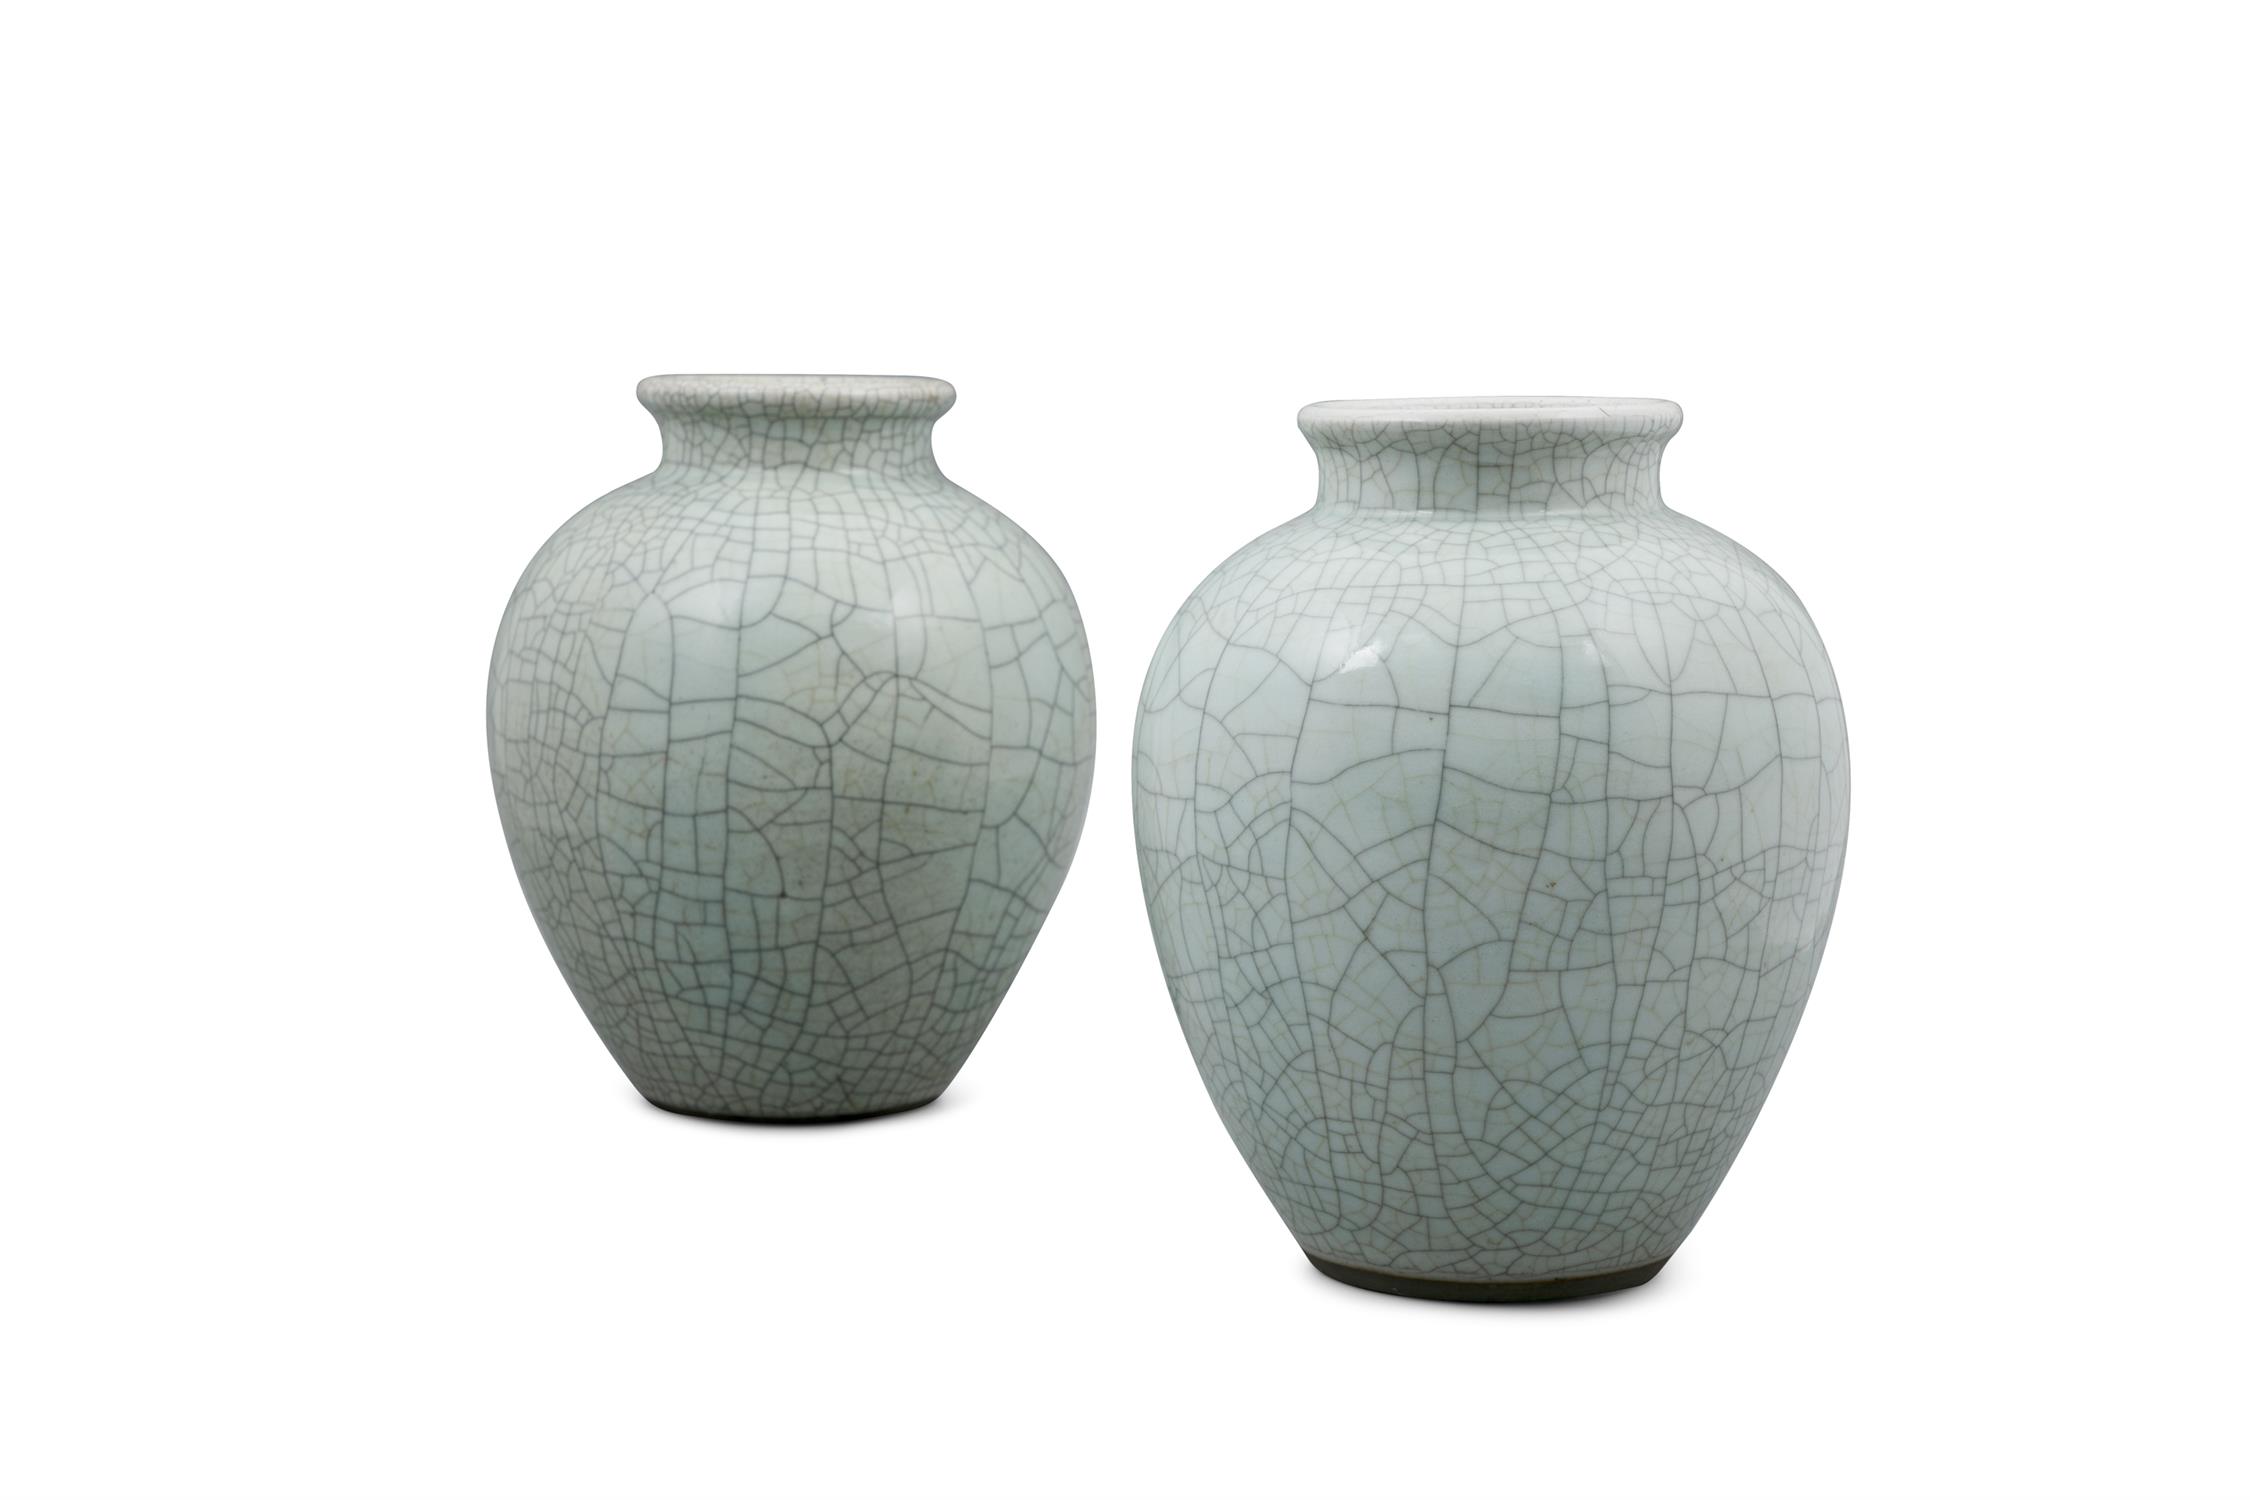 A PAIR OF GE OR GEYAO TYPE CRACKLED CELADON GLAZED PORCELAIN JARS CHINA, LATE QING DYNASTY TO - Image 2 of 9